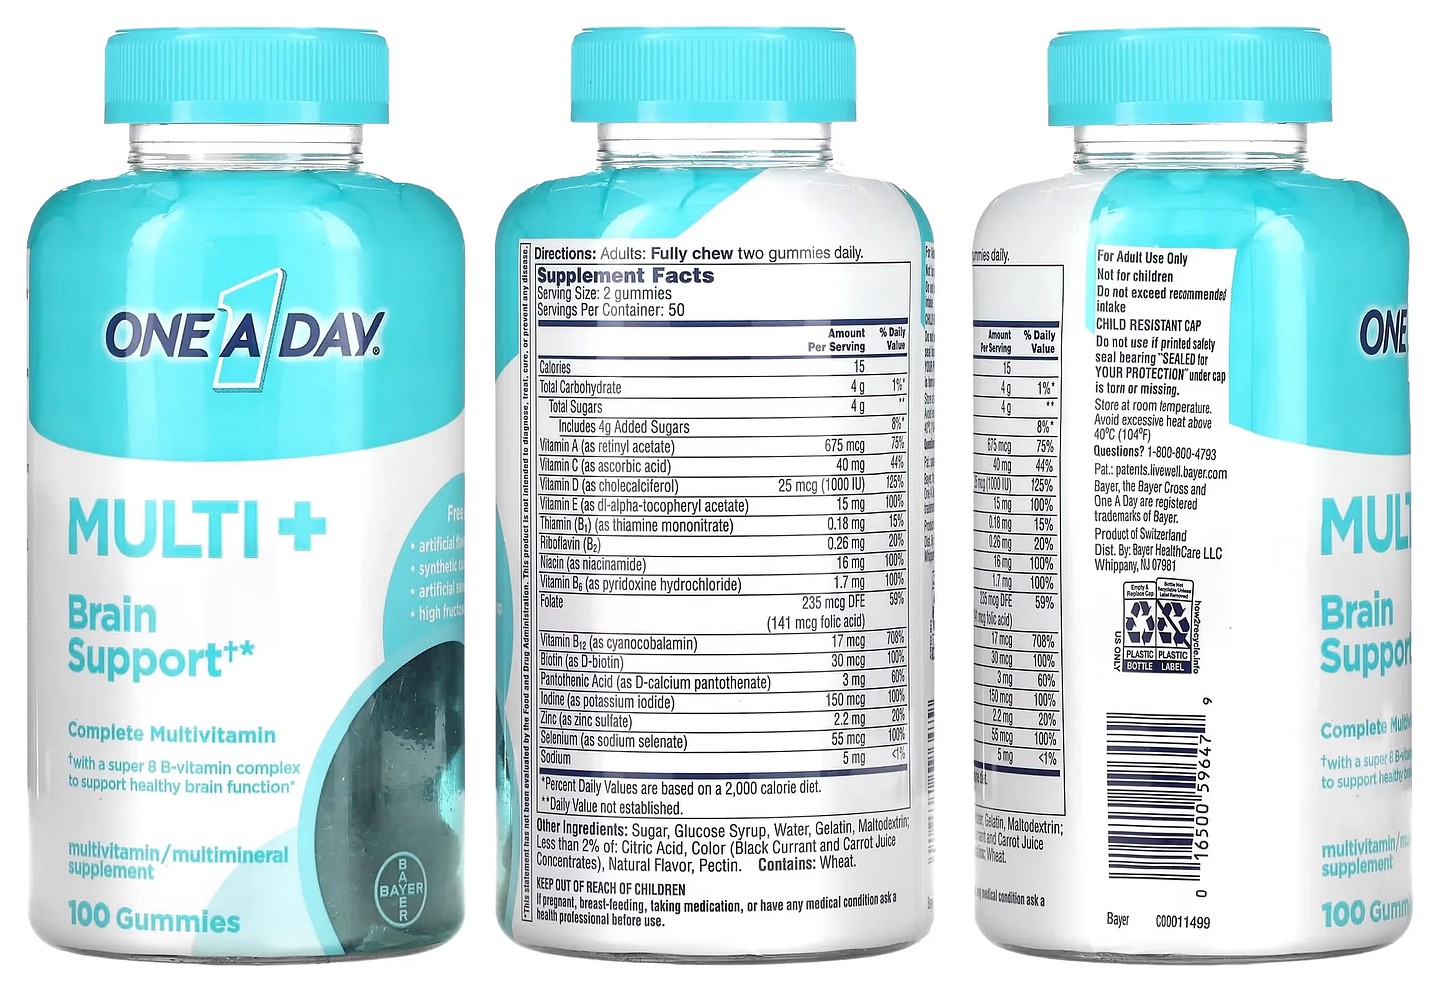 One-A-Day, Multi + Brain Support packaging